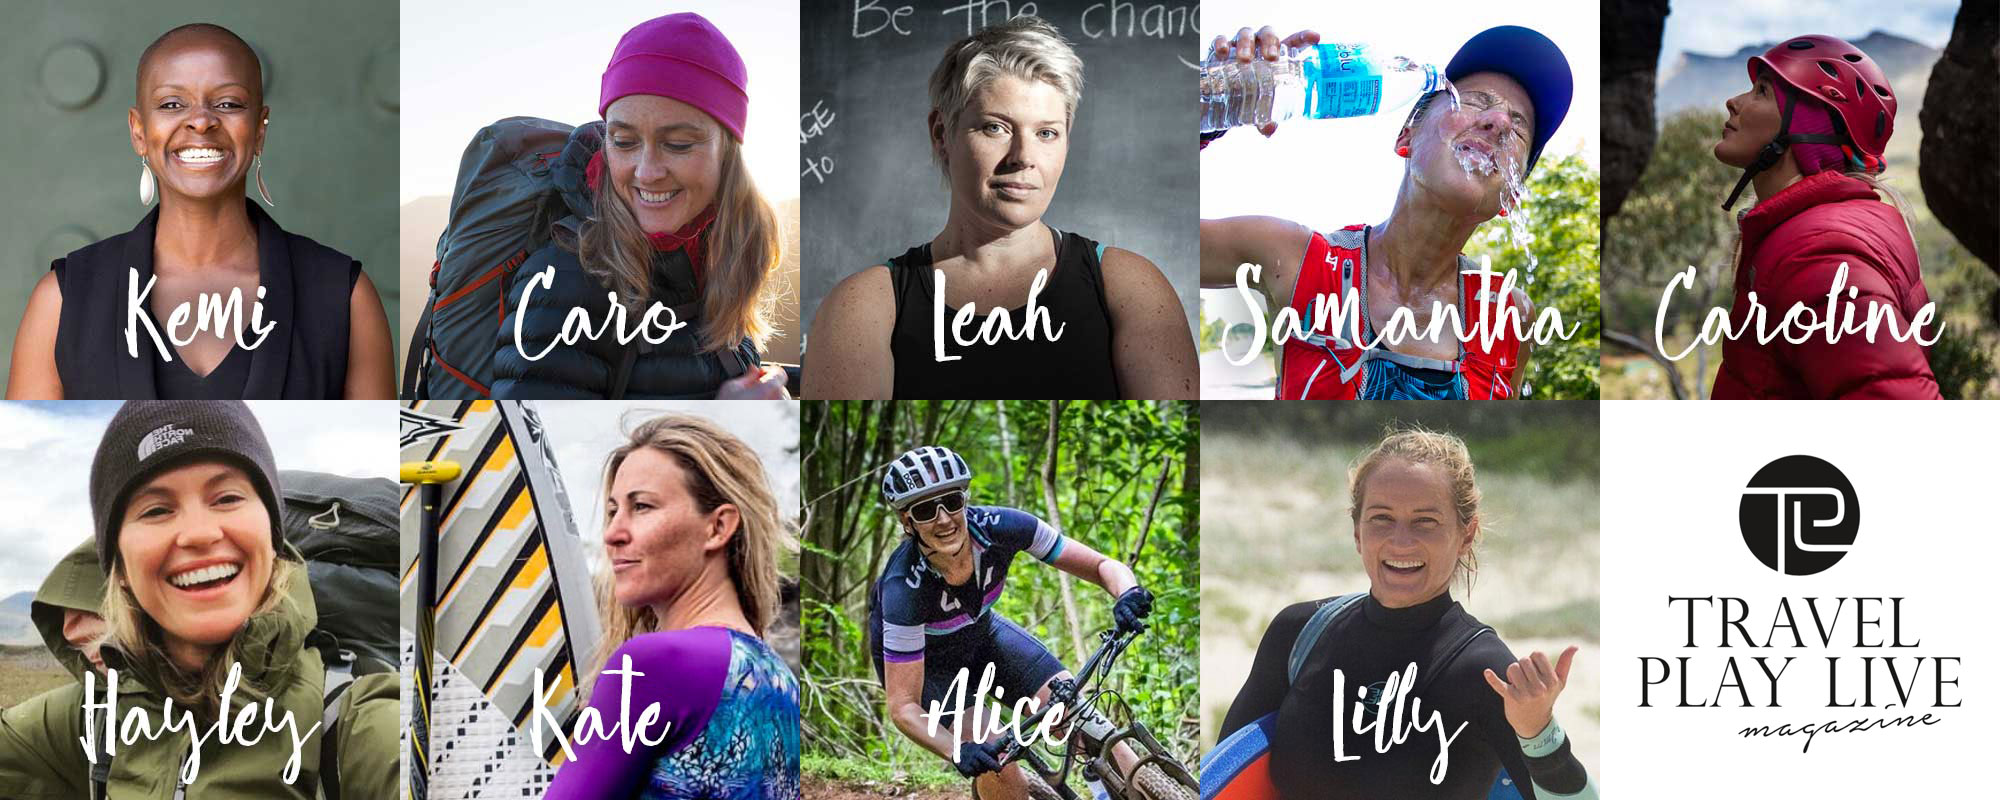 Be inspired by our speakers, ambassadors and coaches